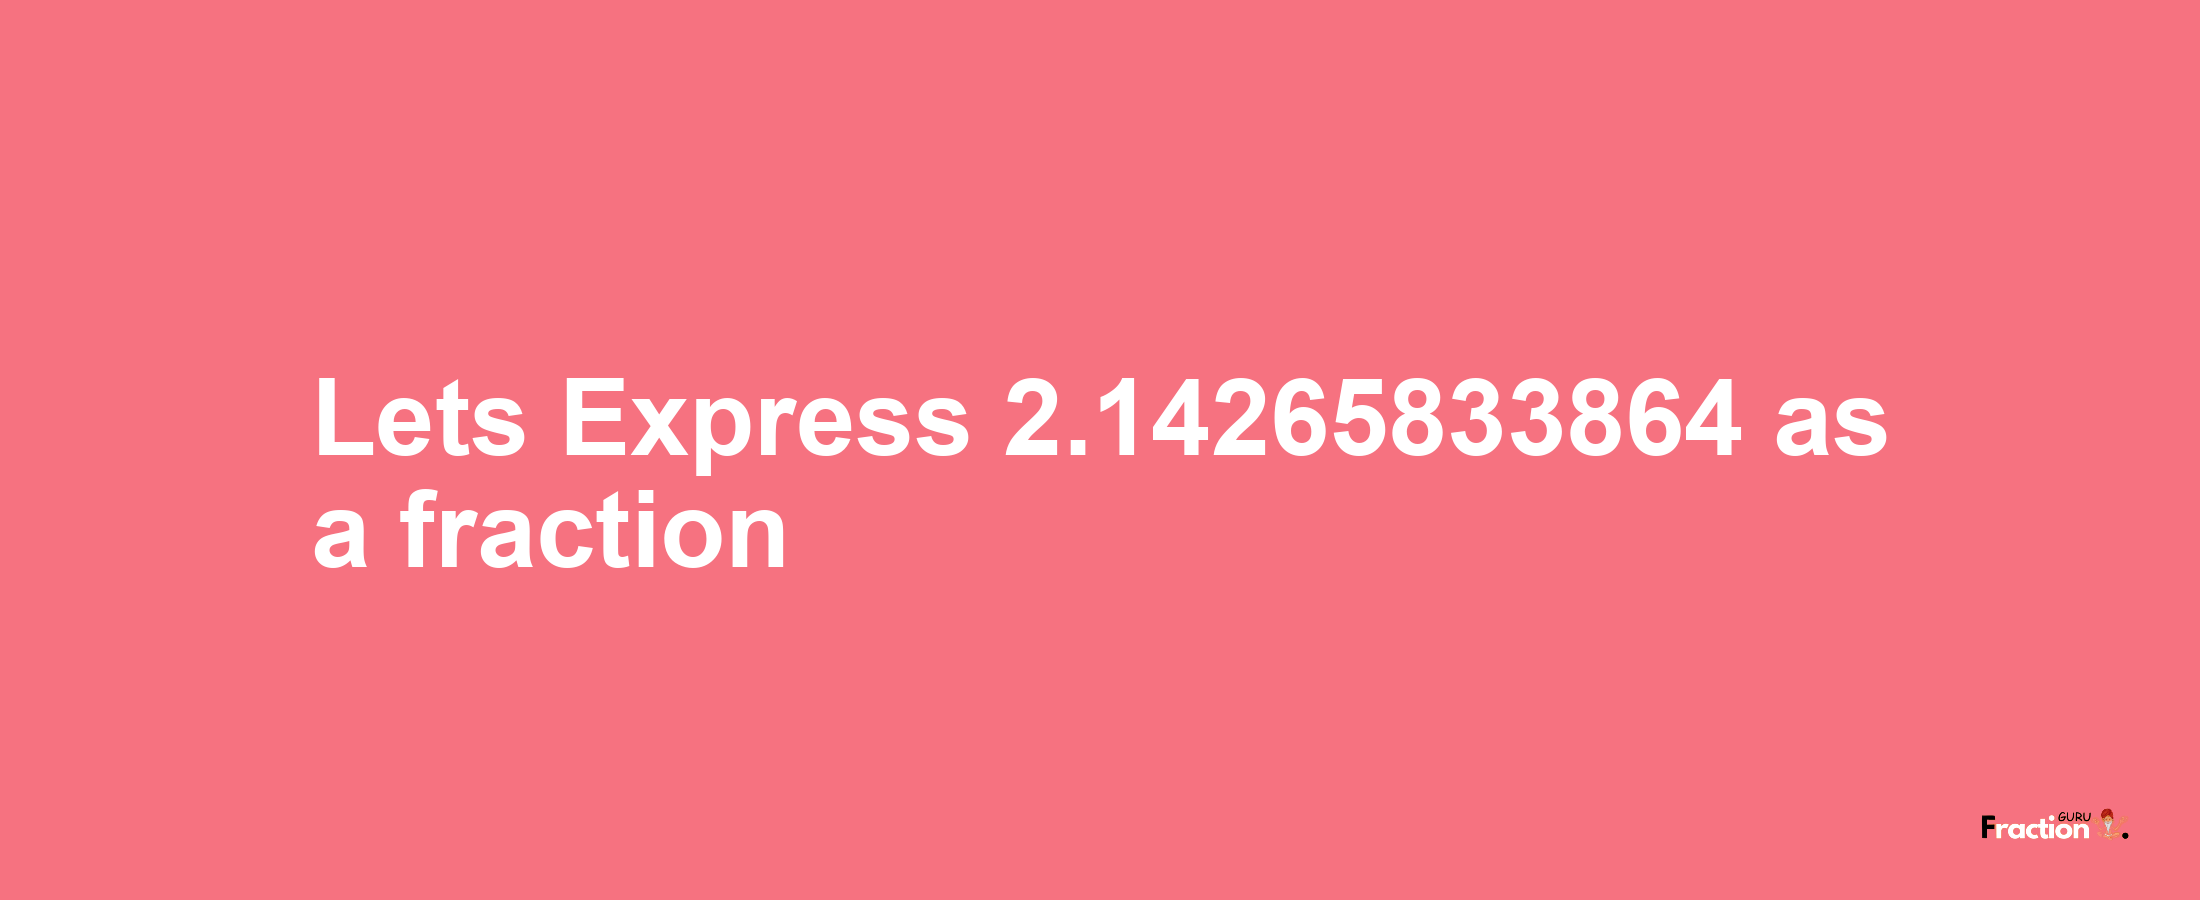 Lets Express 2.14265833864 as afraction